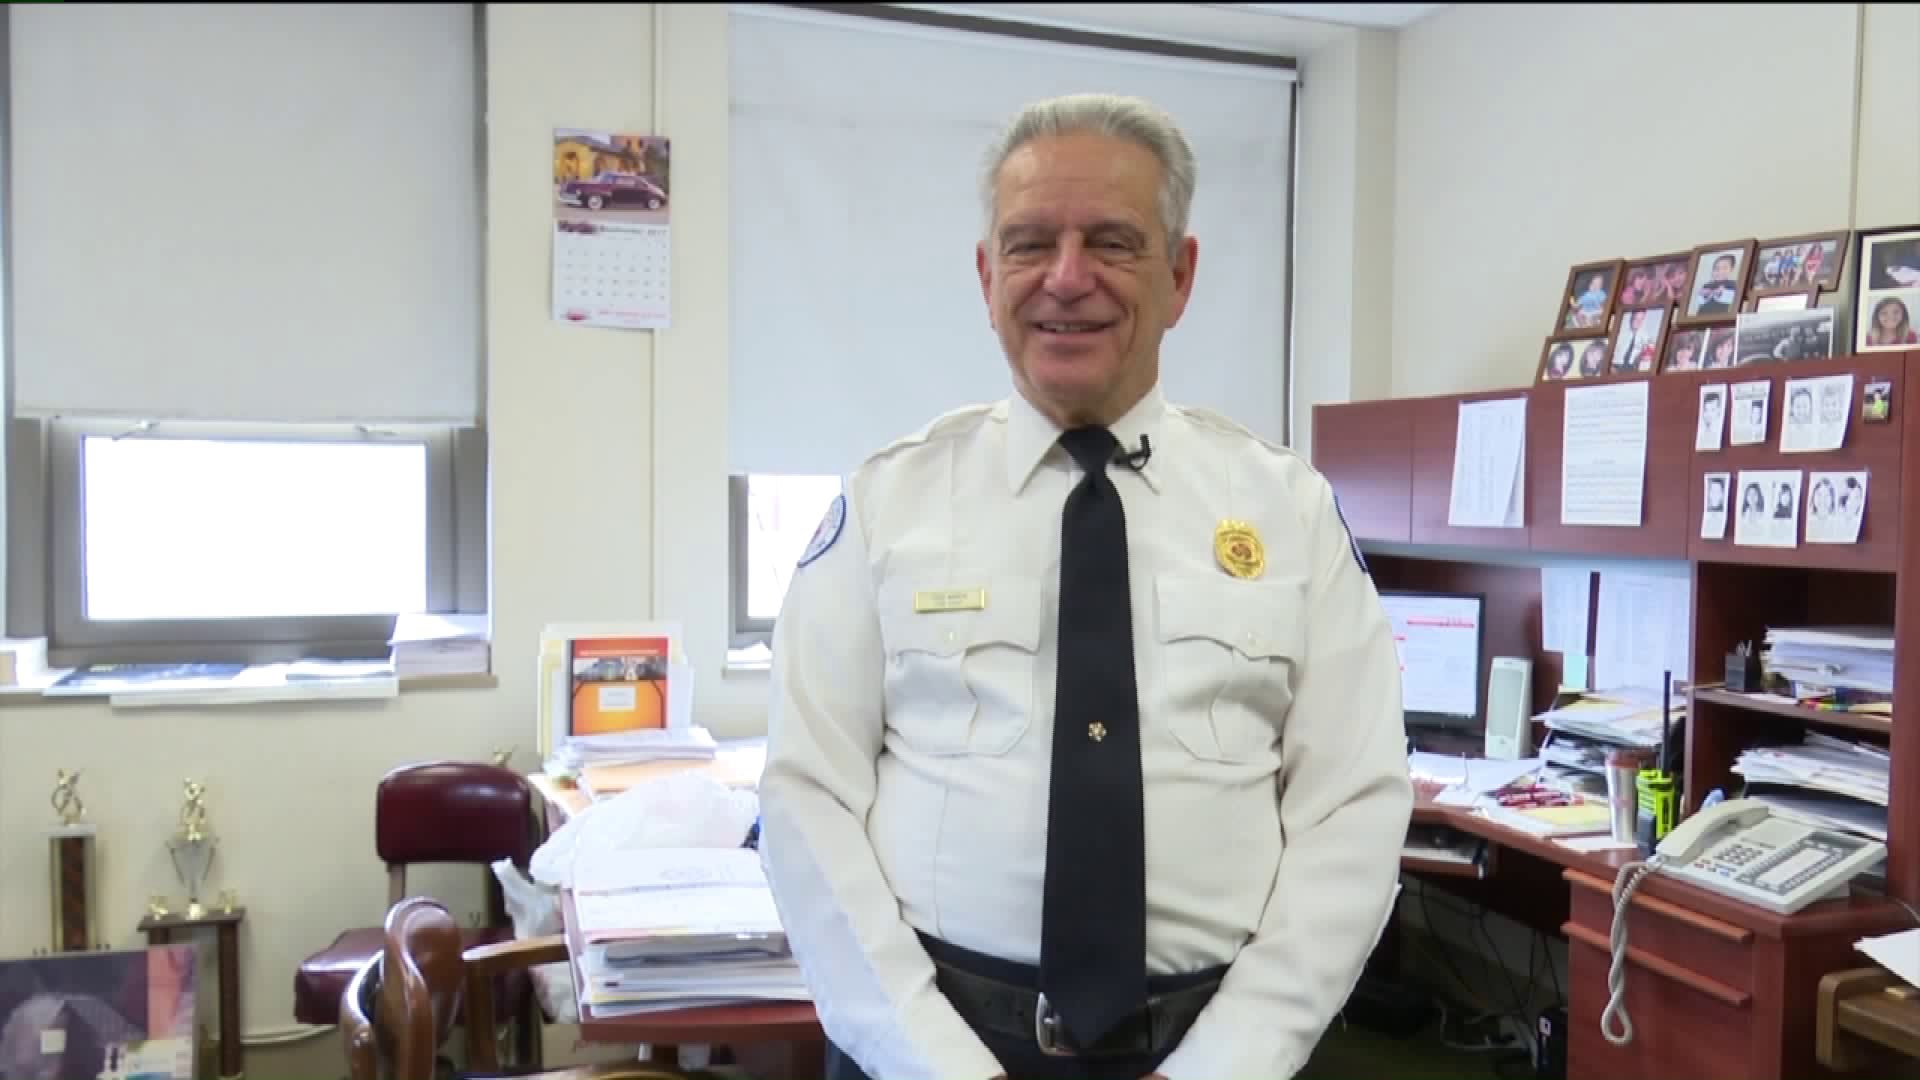 Pottsville Fire Chief Retires After 42 Years